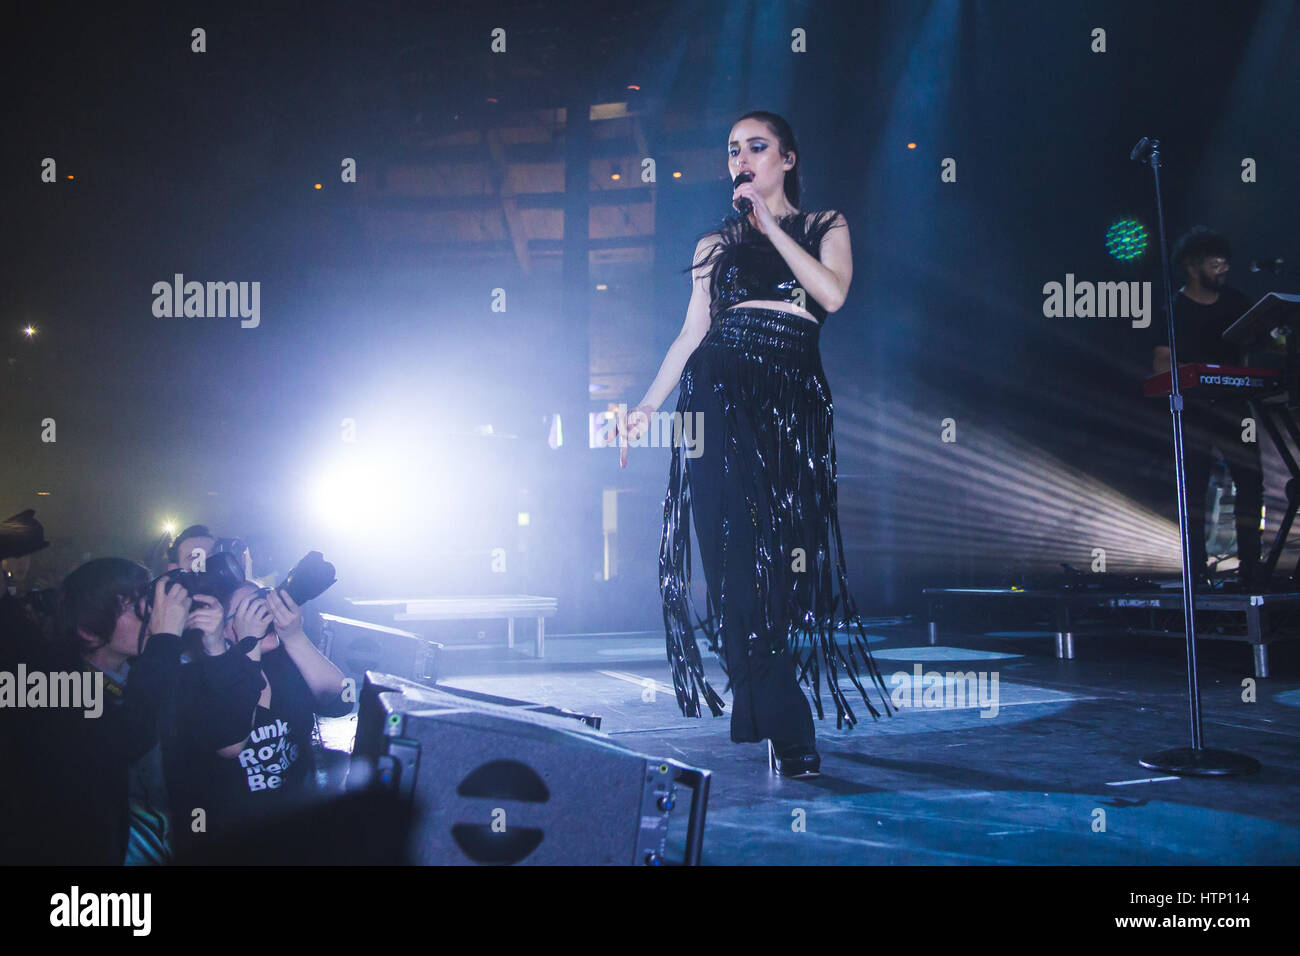 London, UK. 13th March, 2017. March 13, 2017 - American singer and songwriter, Jillian Rose Banks, known simply as Banks, performs in London at the Round House in Camden, 2017 Credit: Myles Wright/ZUMA Wire/Alamy Live News Stock Photo